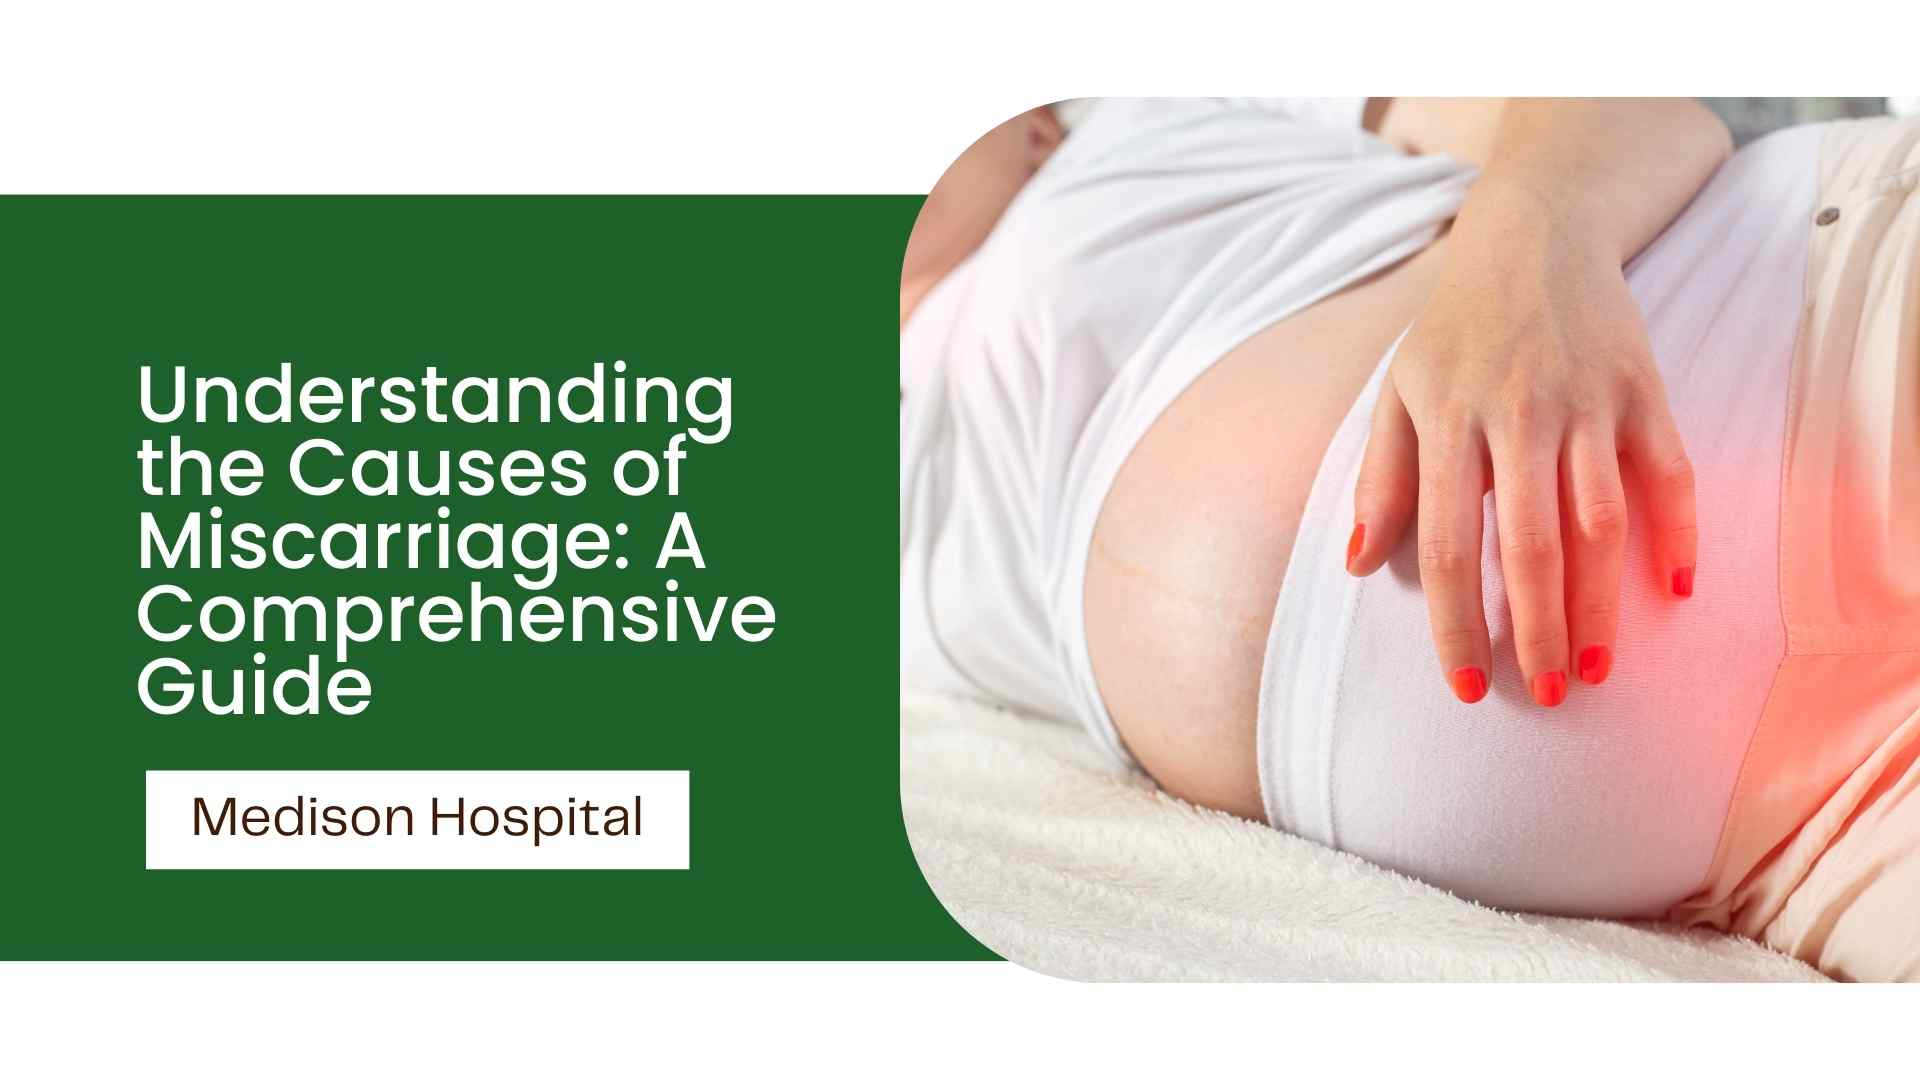 Understanding the Causes of Miscarriage